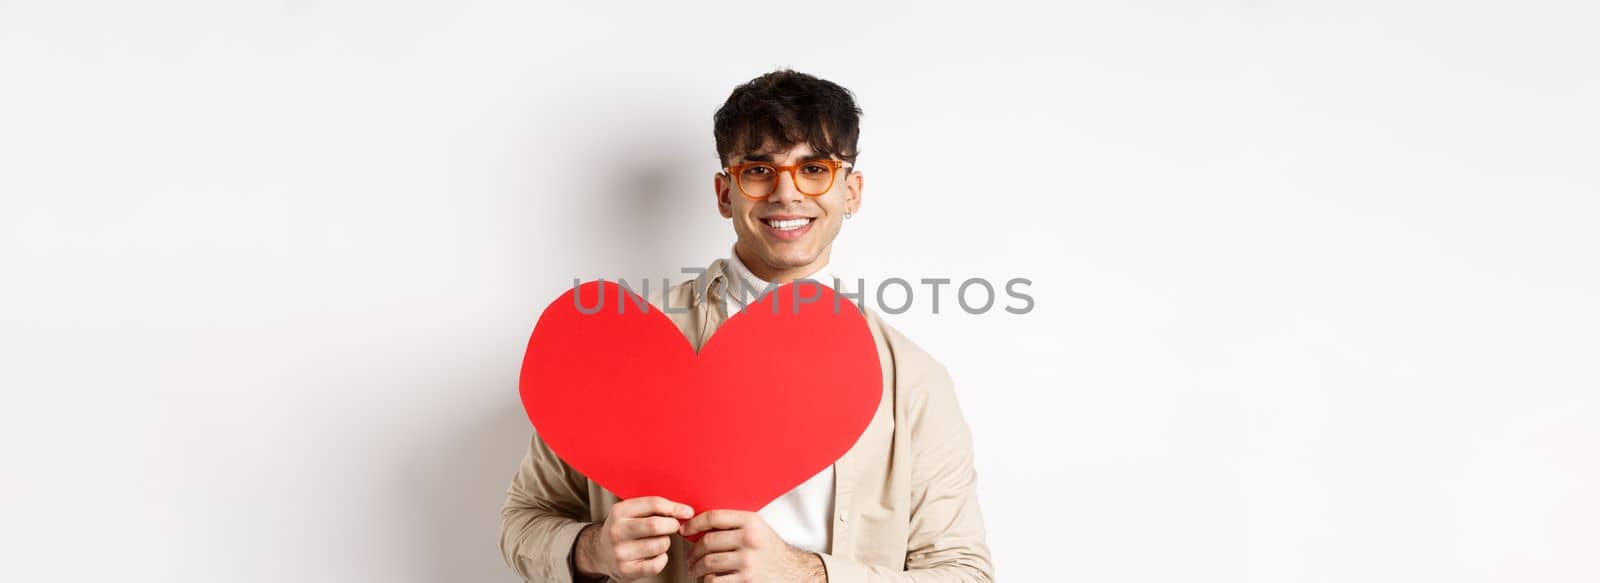 Handsome hipster guy with sunglasses and earring, waiting for true love on Valentines day, holding big red heart and smiling, standing over white background by Benzoix